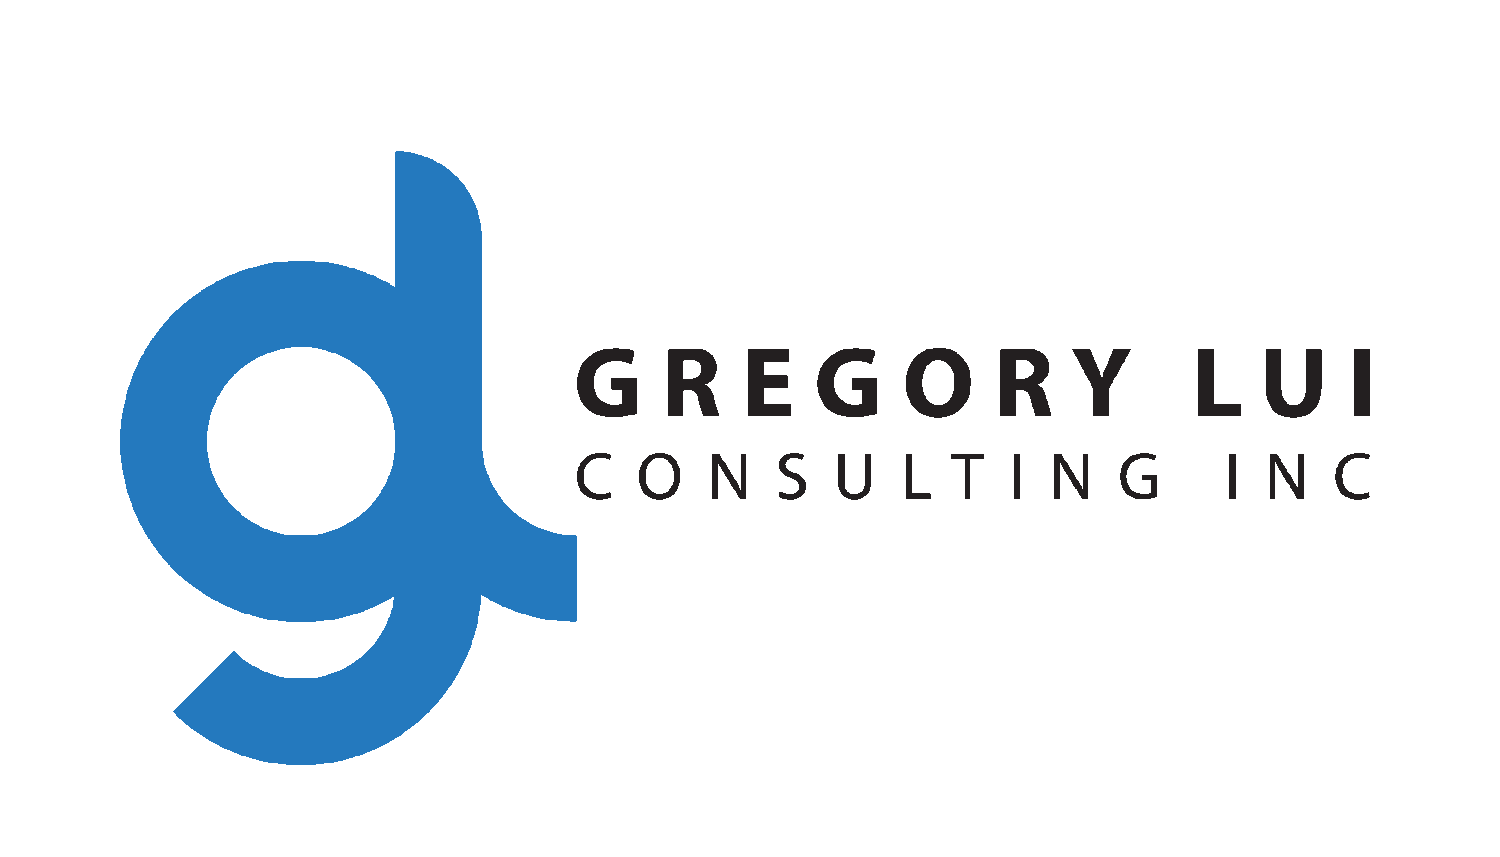 Gregory Lui Consulting Inc. 